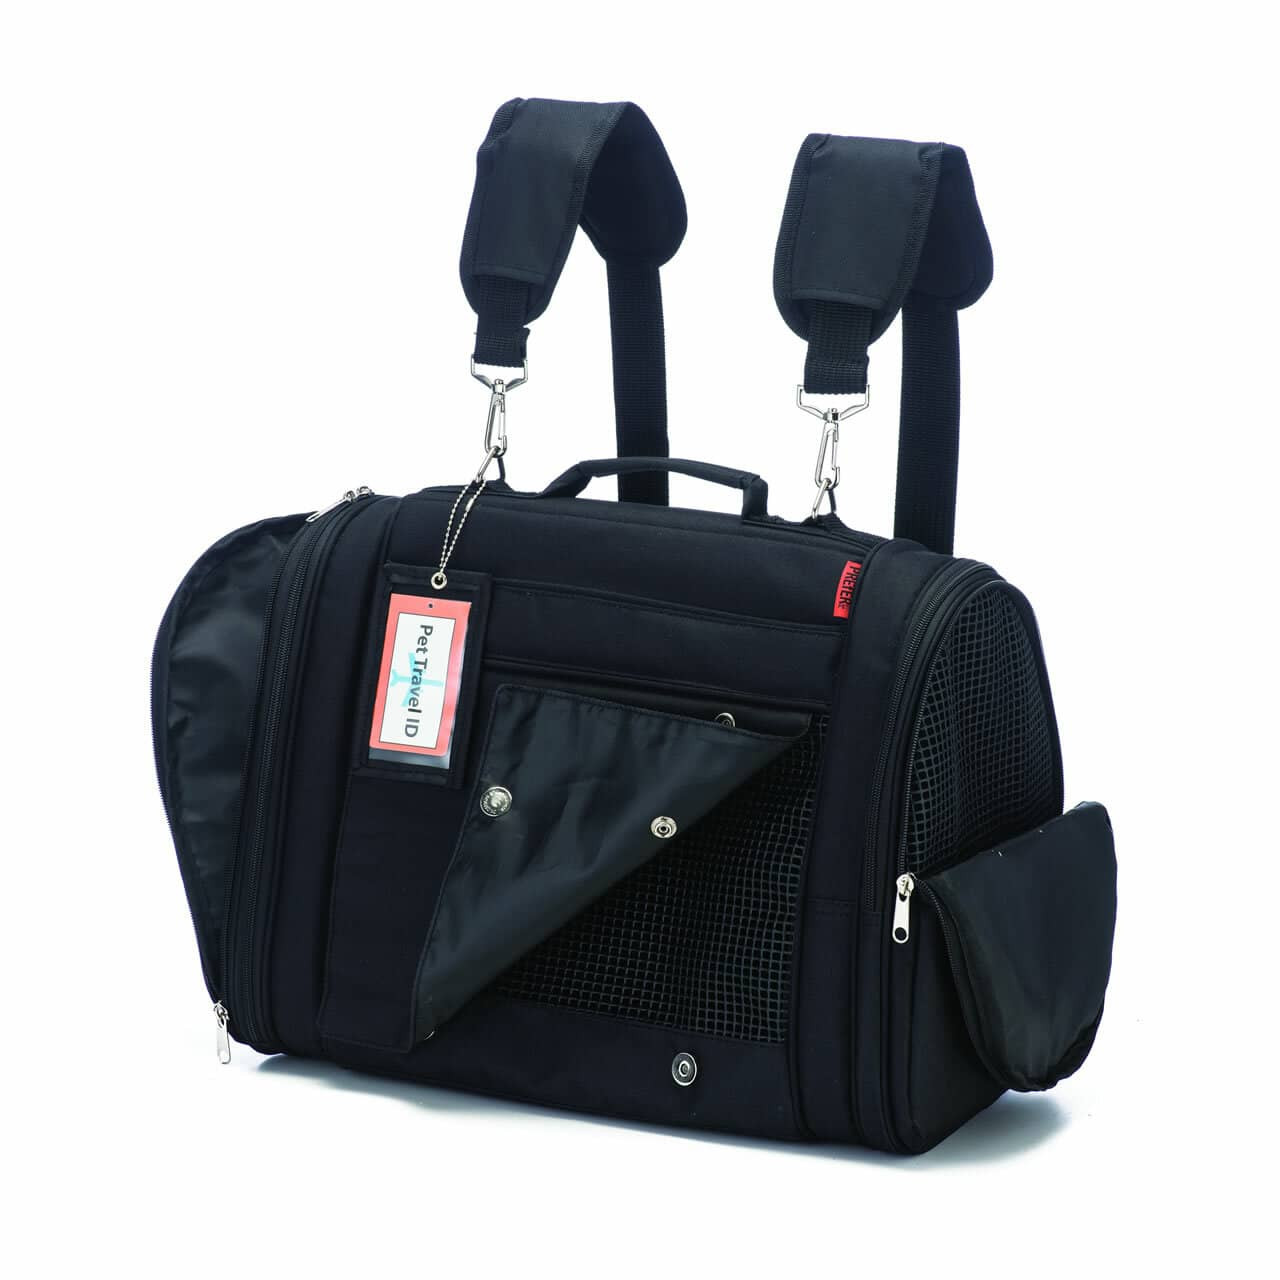 https://cdn11.bigcommerce.com/s-492ad/images/stencil/1280x1280/products/682/3126/Privacy-Backpack-Pet-Carrier-1_opt__06655.1625975080.jpg?c=2